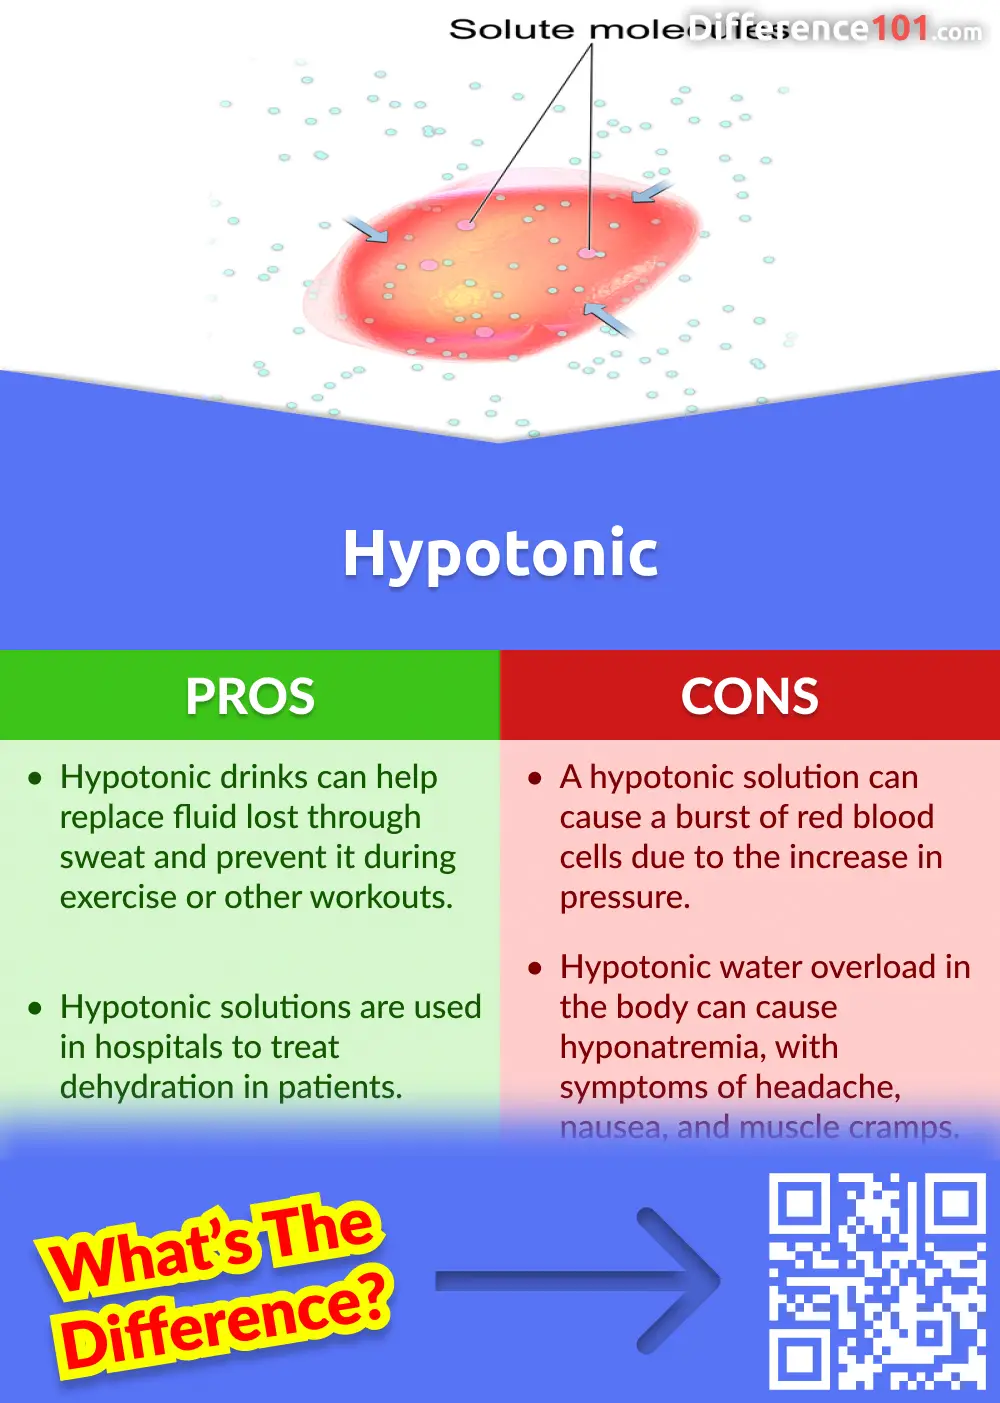 Hypotonic Pros and Cons